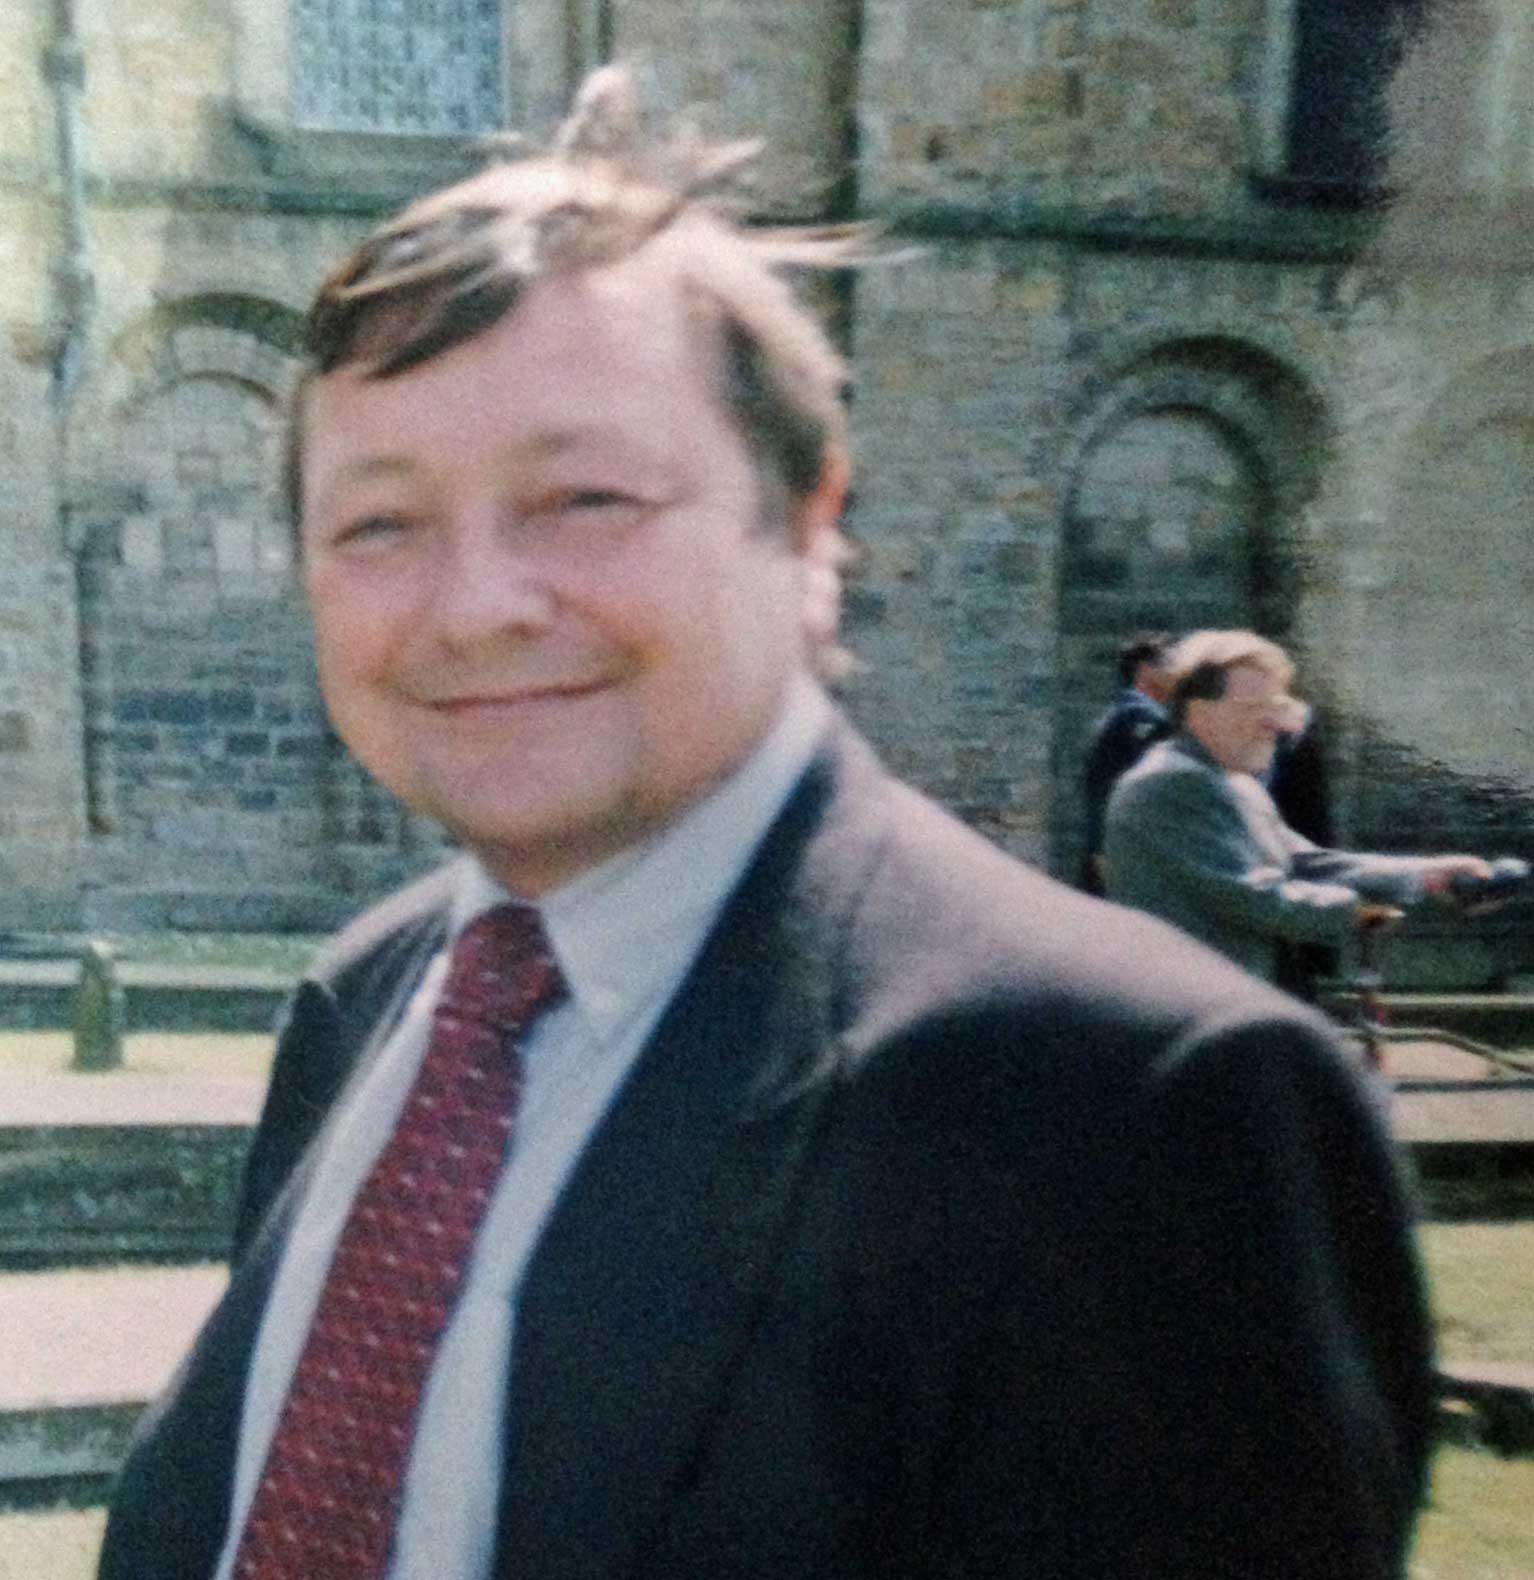 Lisa’s dad Keith Millett, the former deputy head of Granby High School, died at the age of just 55 in 2004 after a long battle with oesophageal cancer